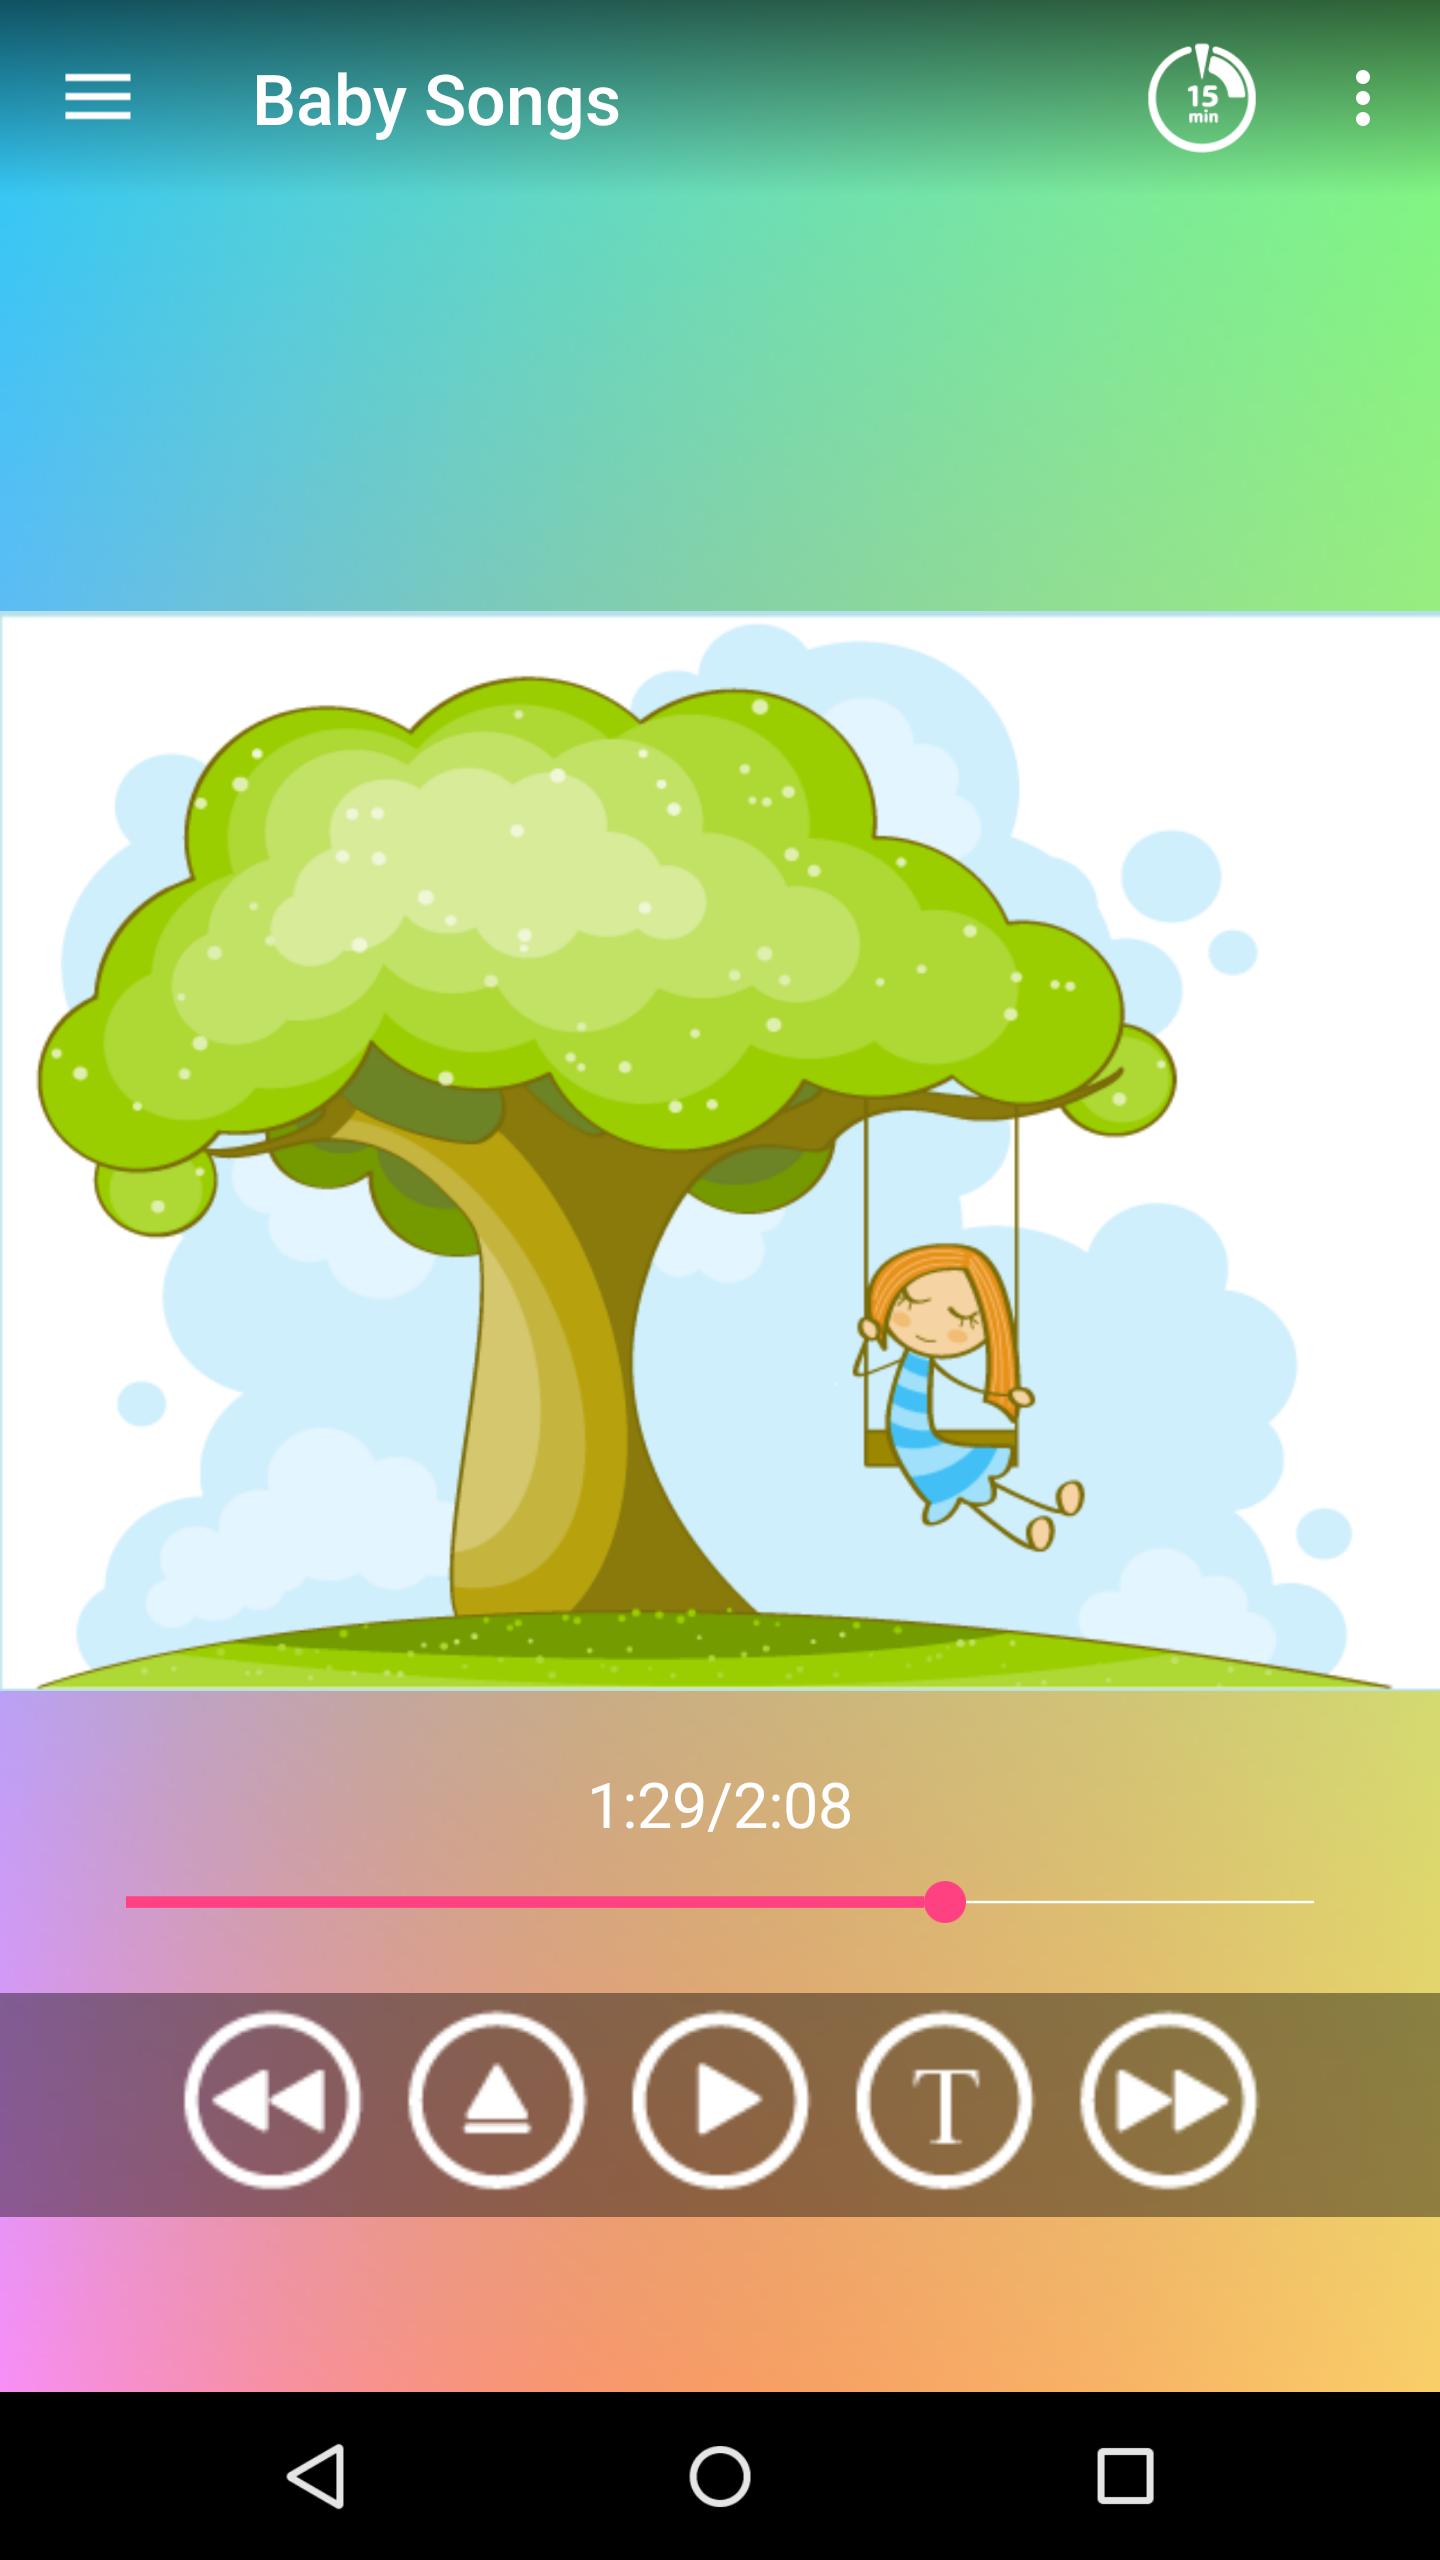 Baby songs free Nursery rhymes for Android - APK Download